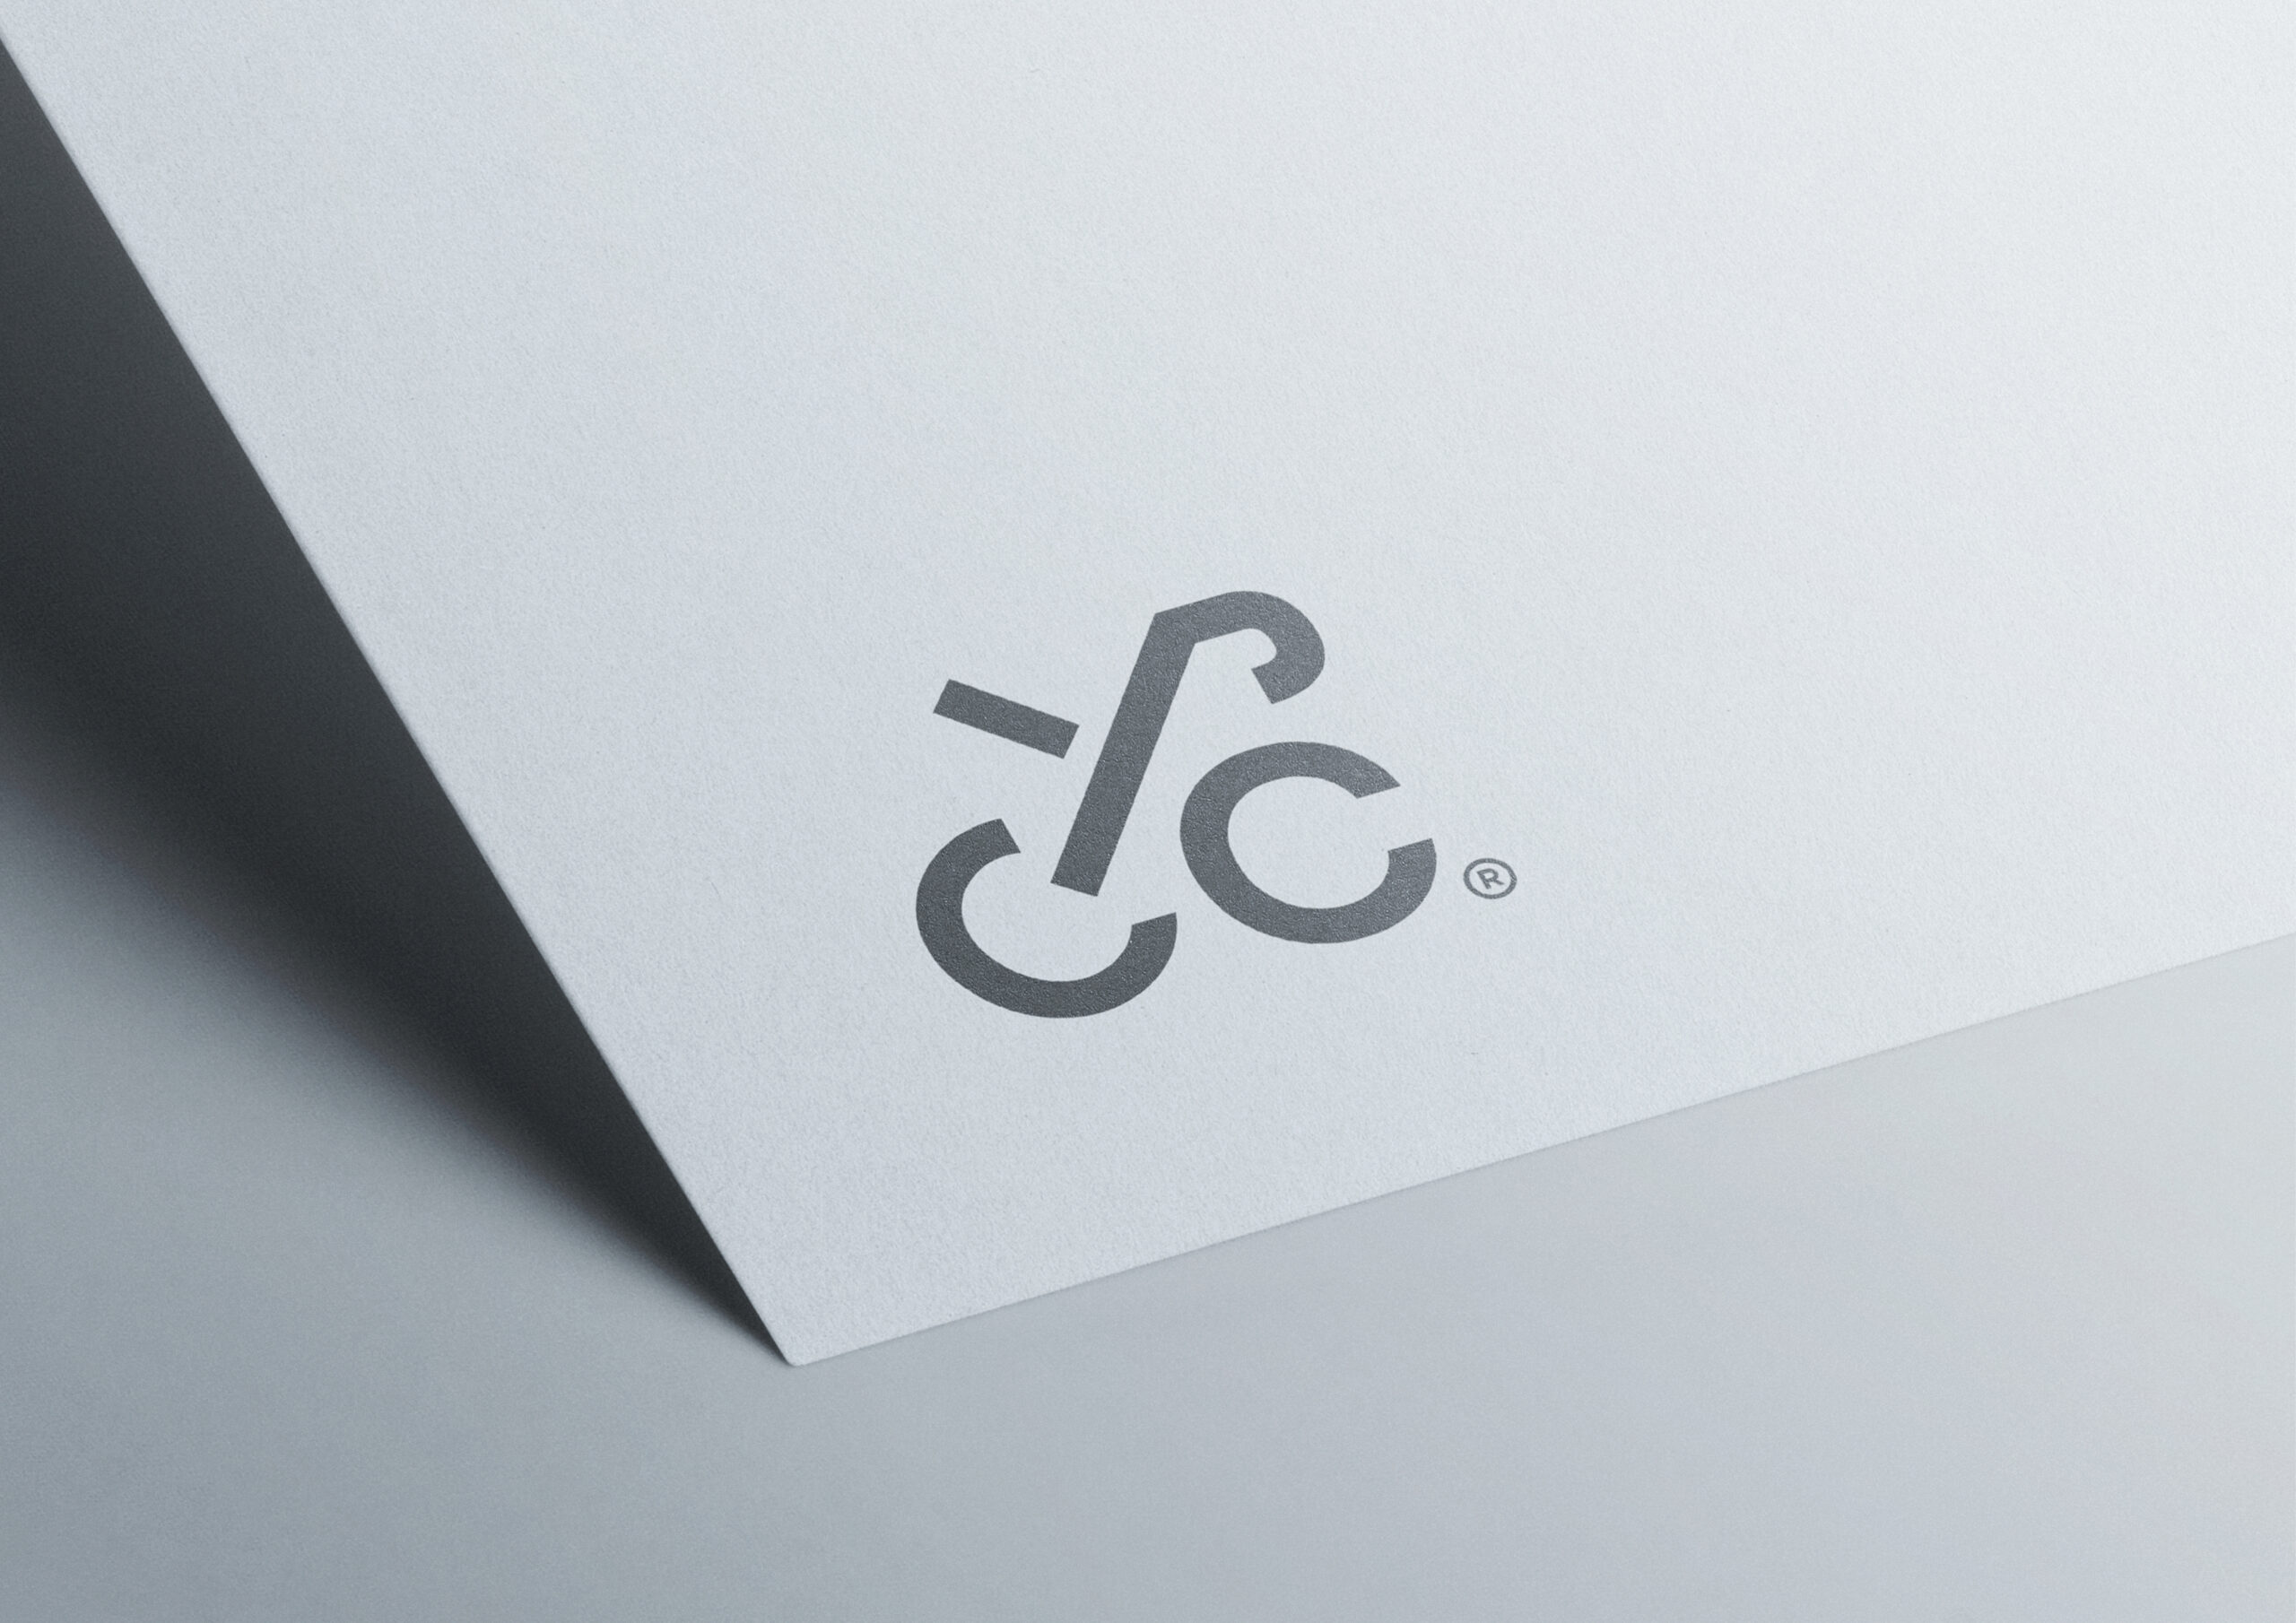 Cycle Co. Spin Studio Brand Identity, Merchandise and Signage Design and Development by TL Design Co.